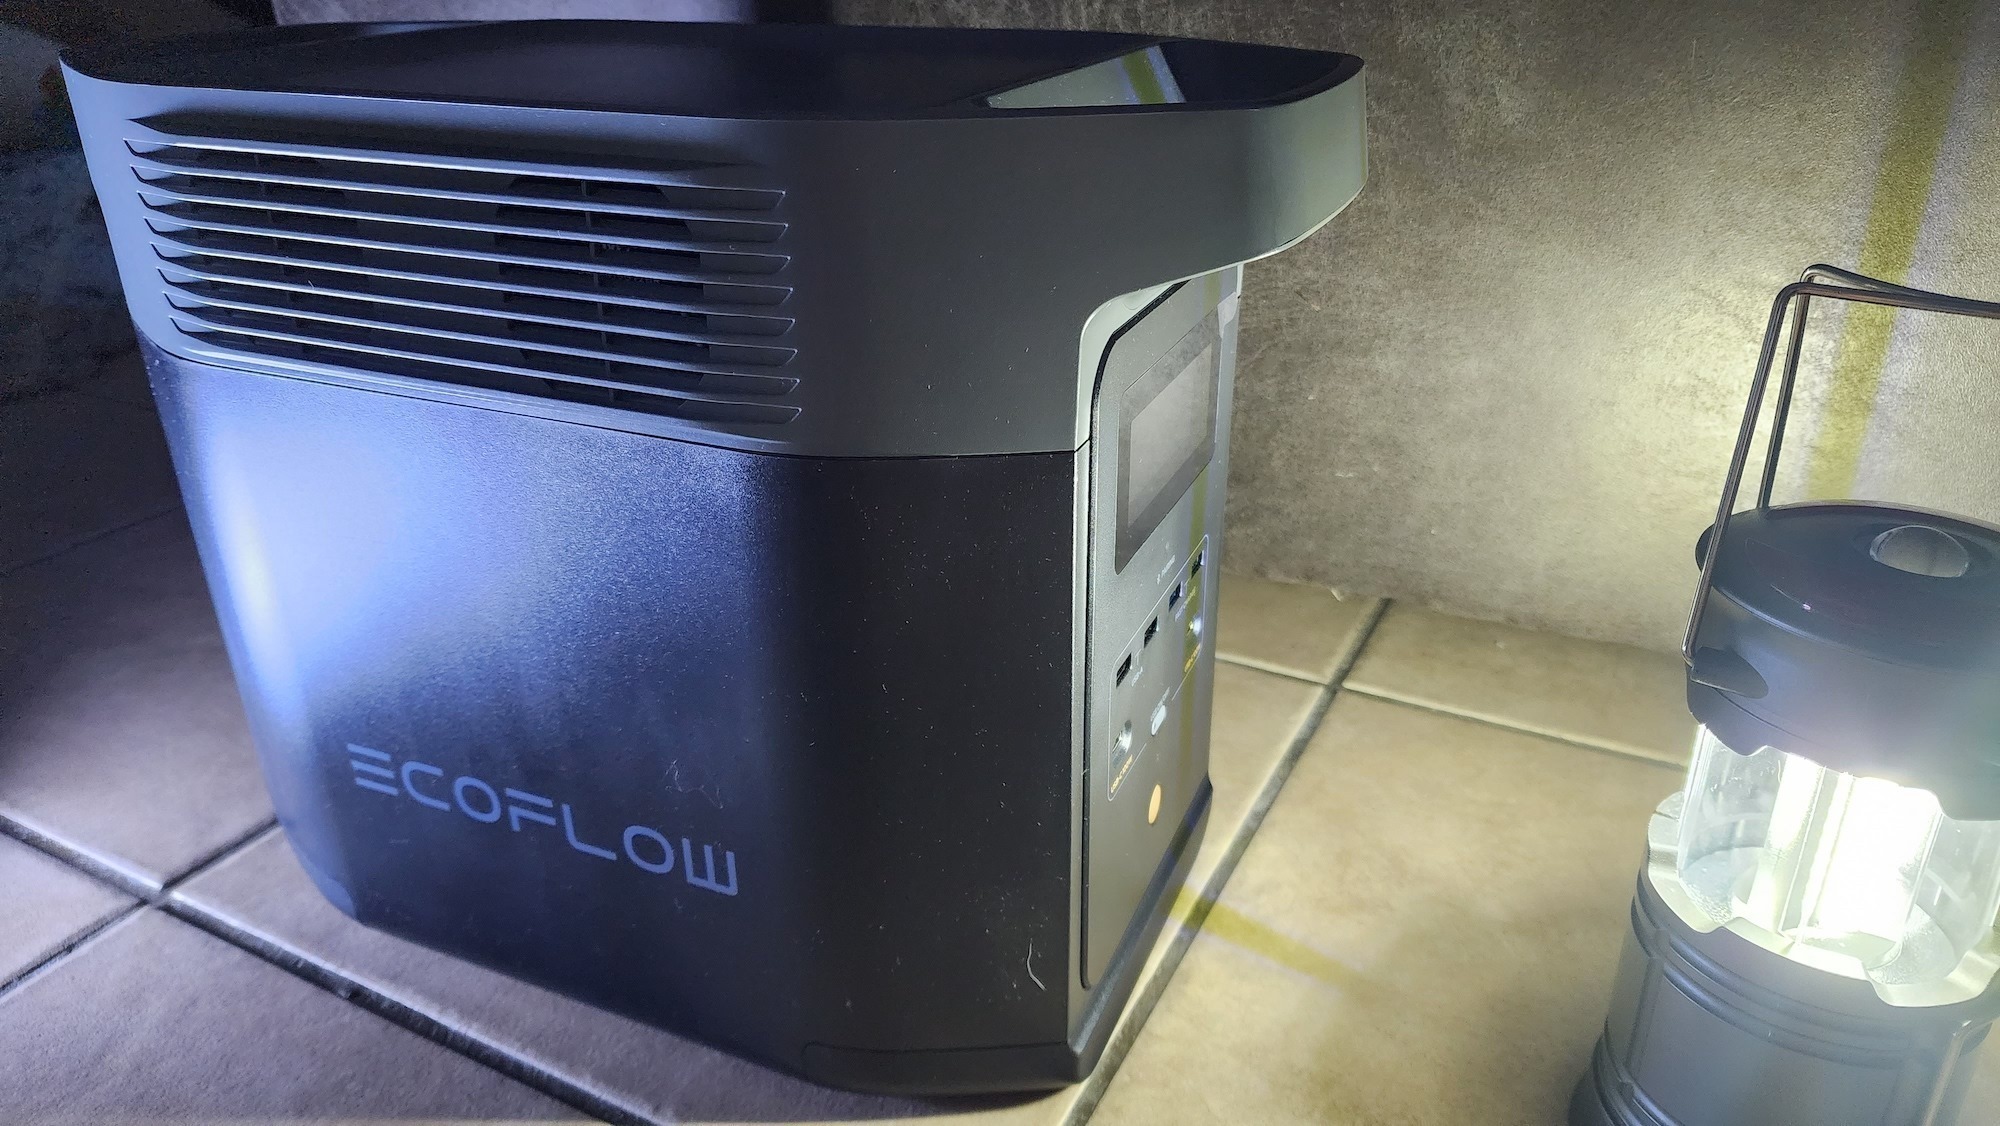 EcoFlow Delta 2 Review: Powers almost anything